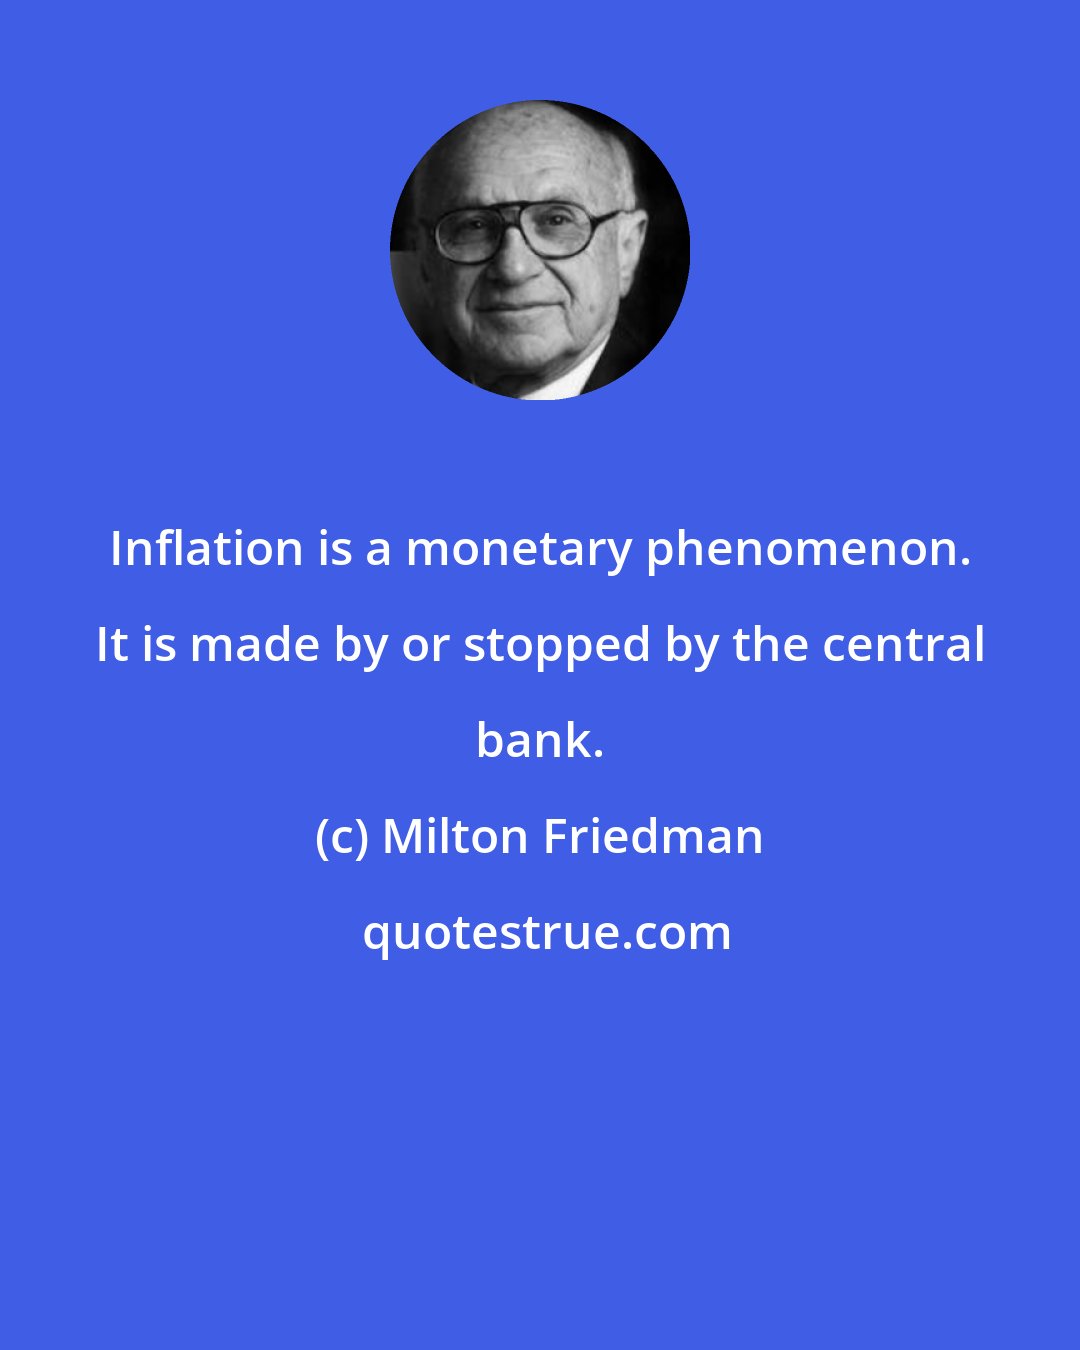 Milton Friedman: Inflation is a monetary phenomenon. It is made by or stopped by the central bank.